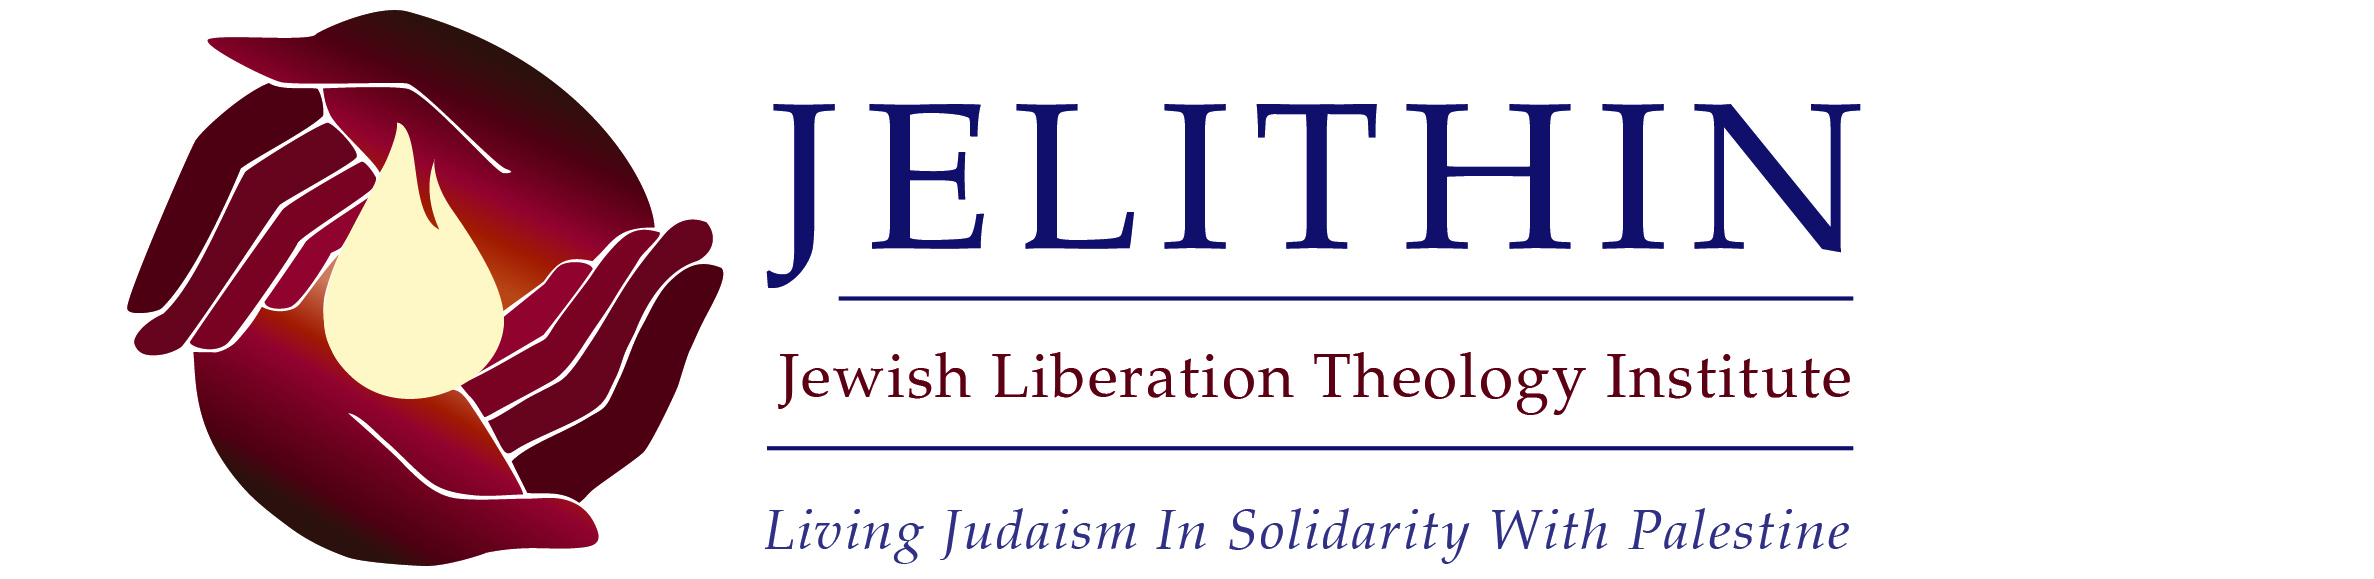 Logo  Hands around flame.
JELITHIN
Jewish Liberation Theology Institute: Living Judaism In Solidary With Palestine